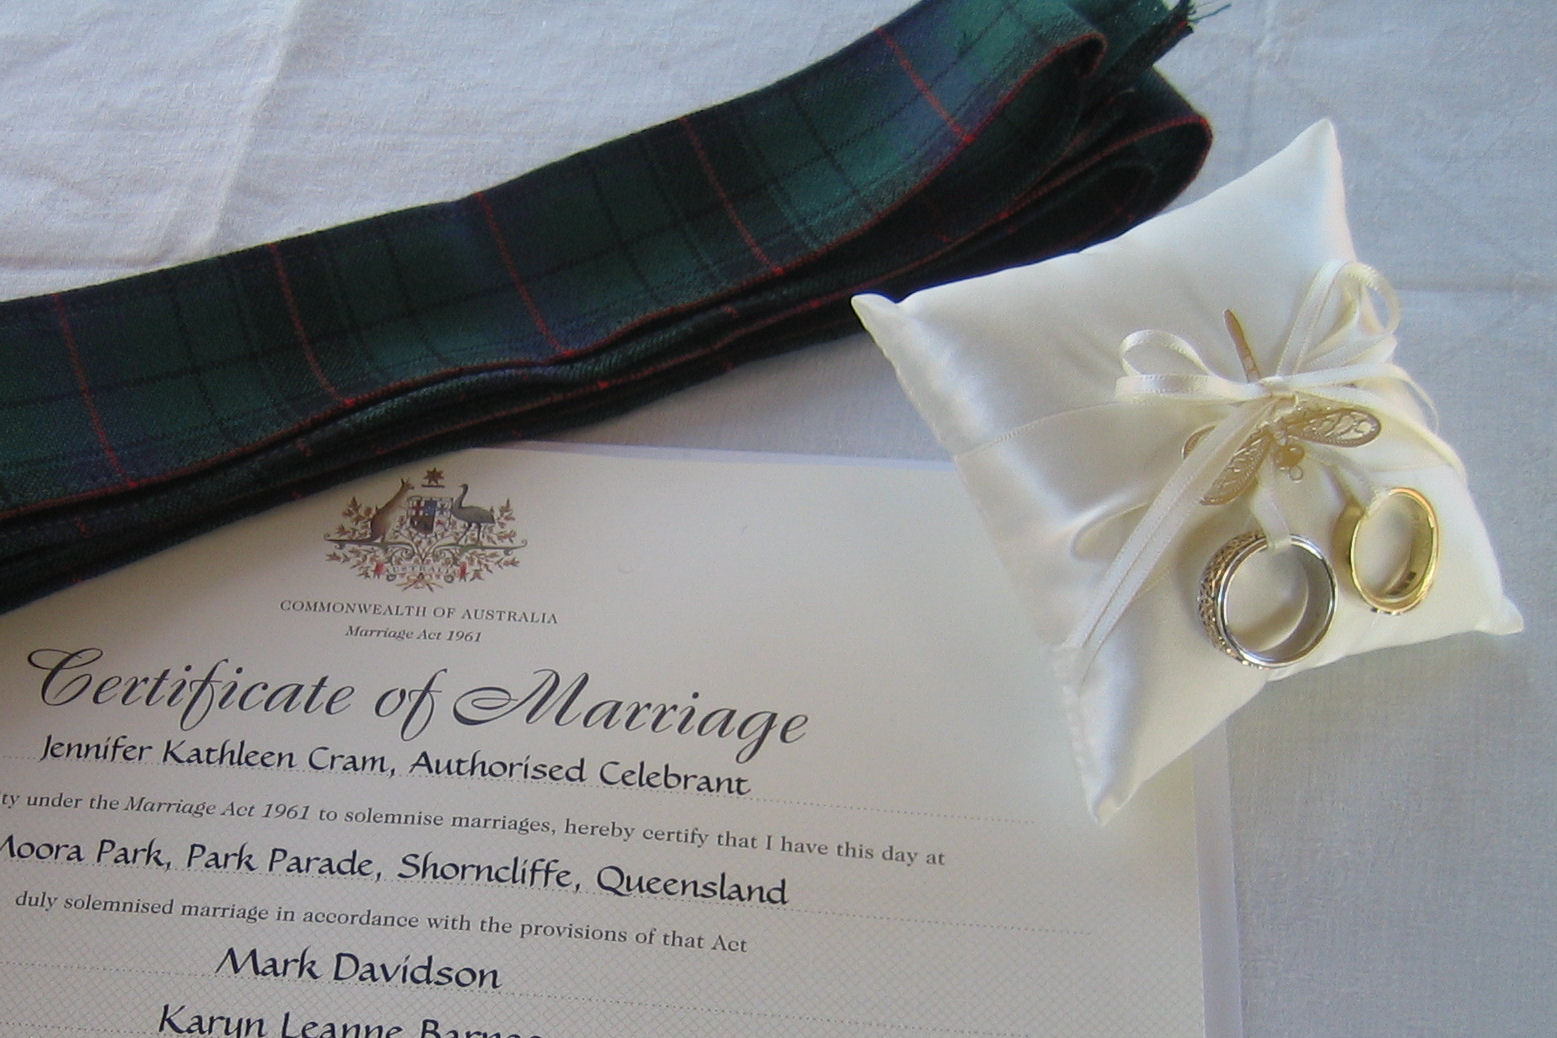 Tartan Handfasting Band with wedding rings on a
                  pillow